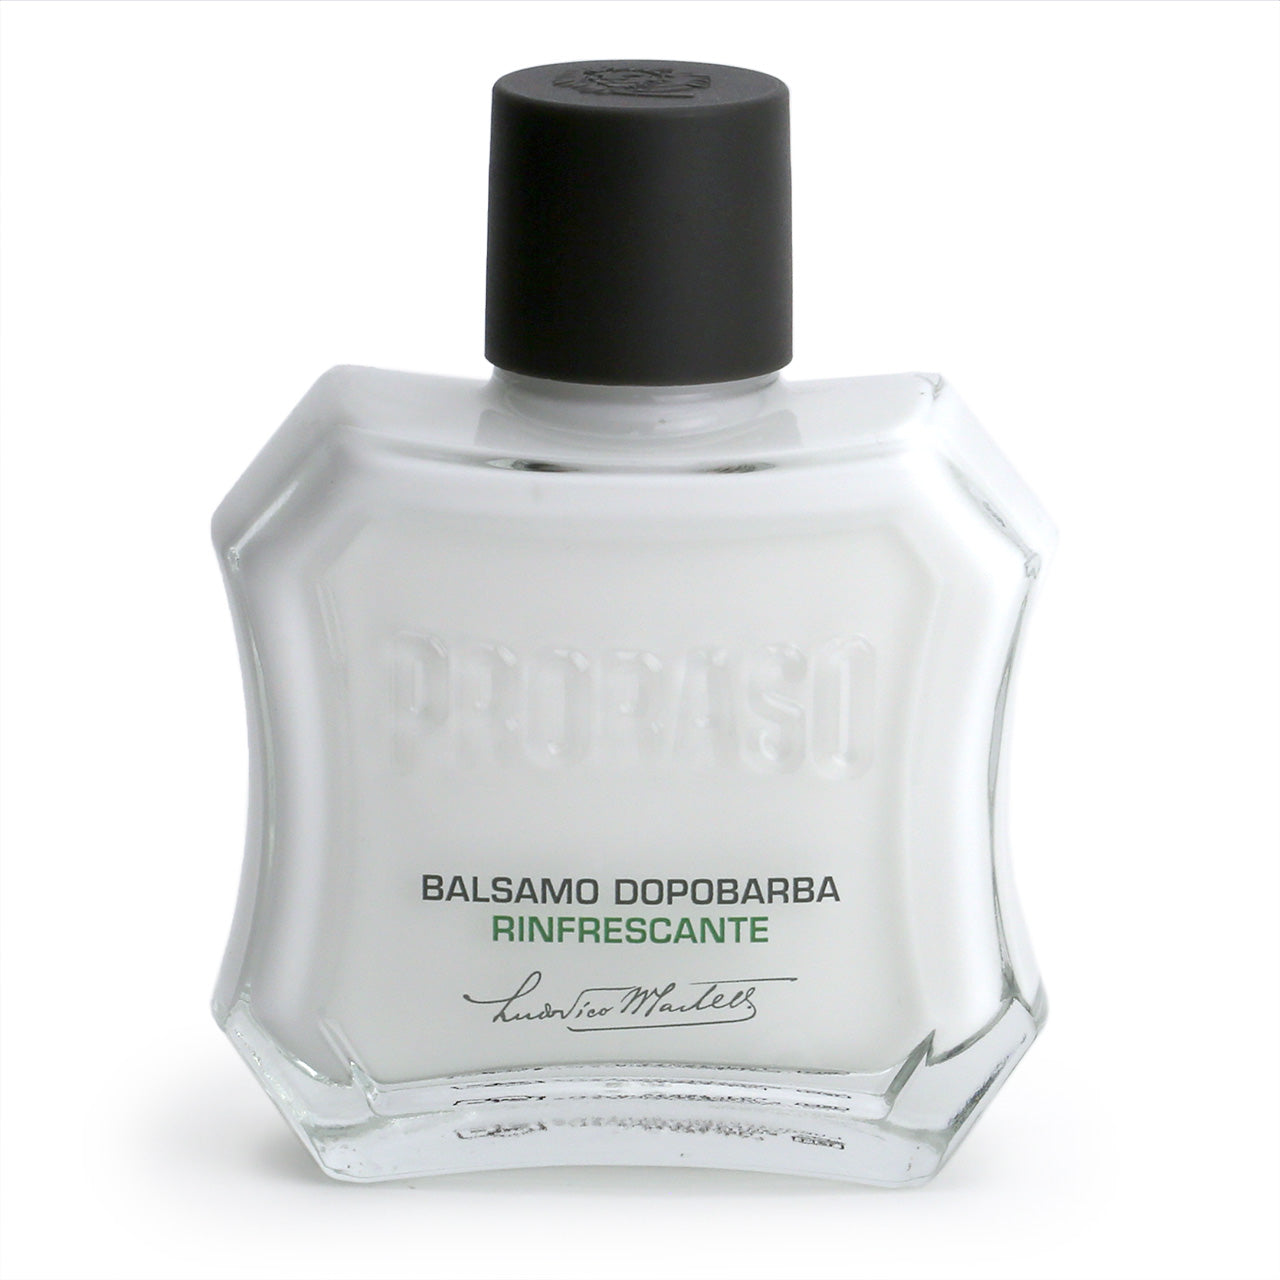 Proraso AS Balm Refreshing with Eucalyptus Oil & Menthol is in a retro bottle and box